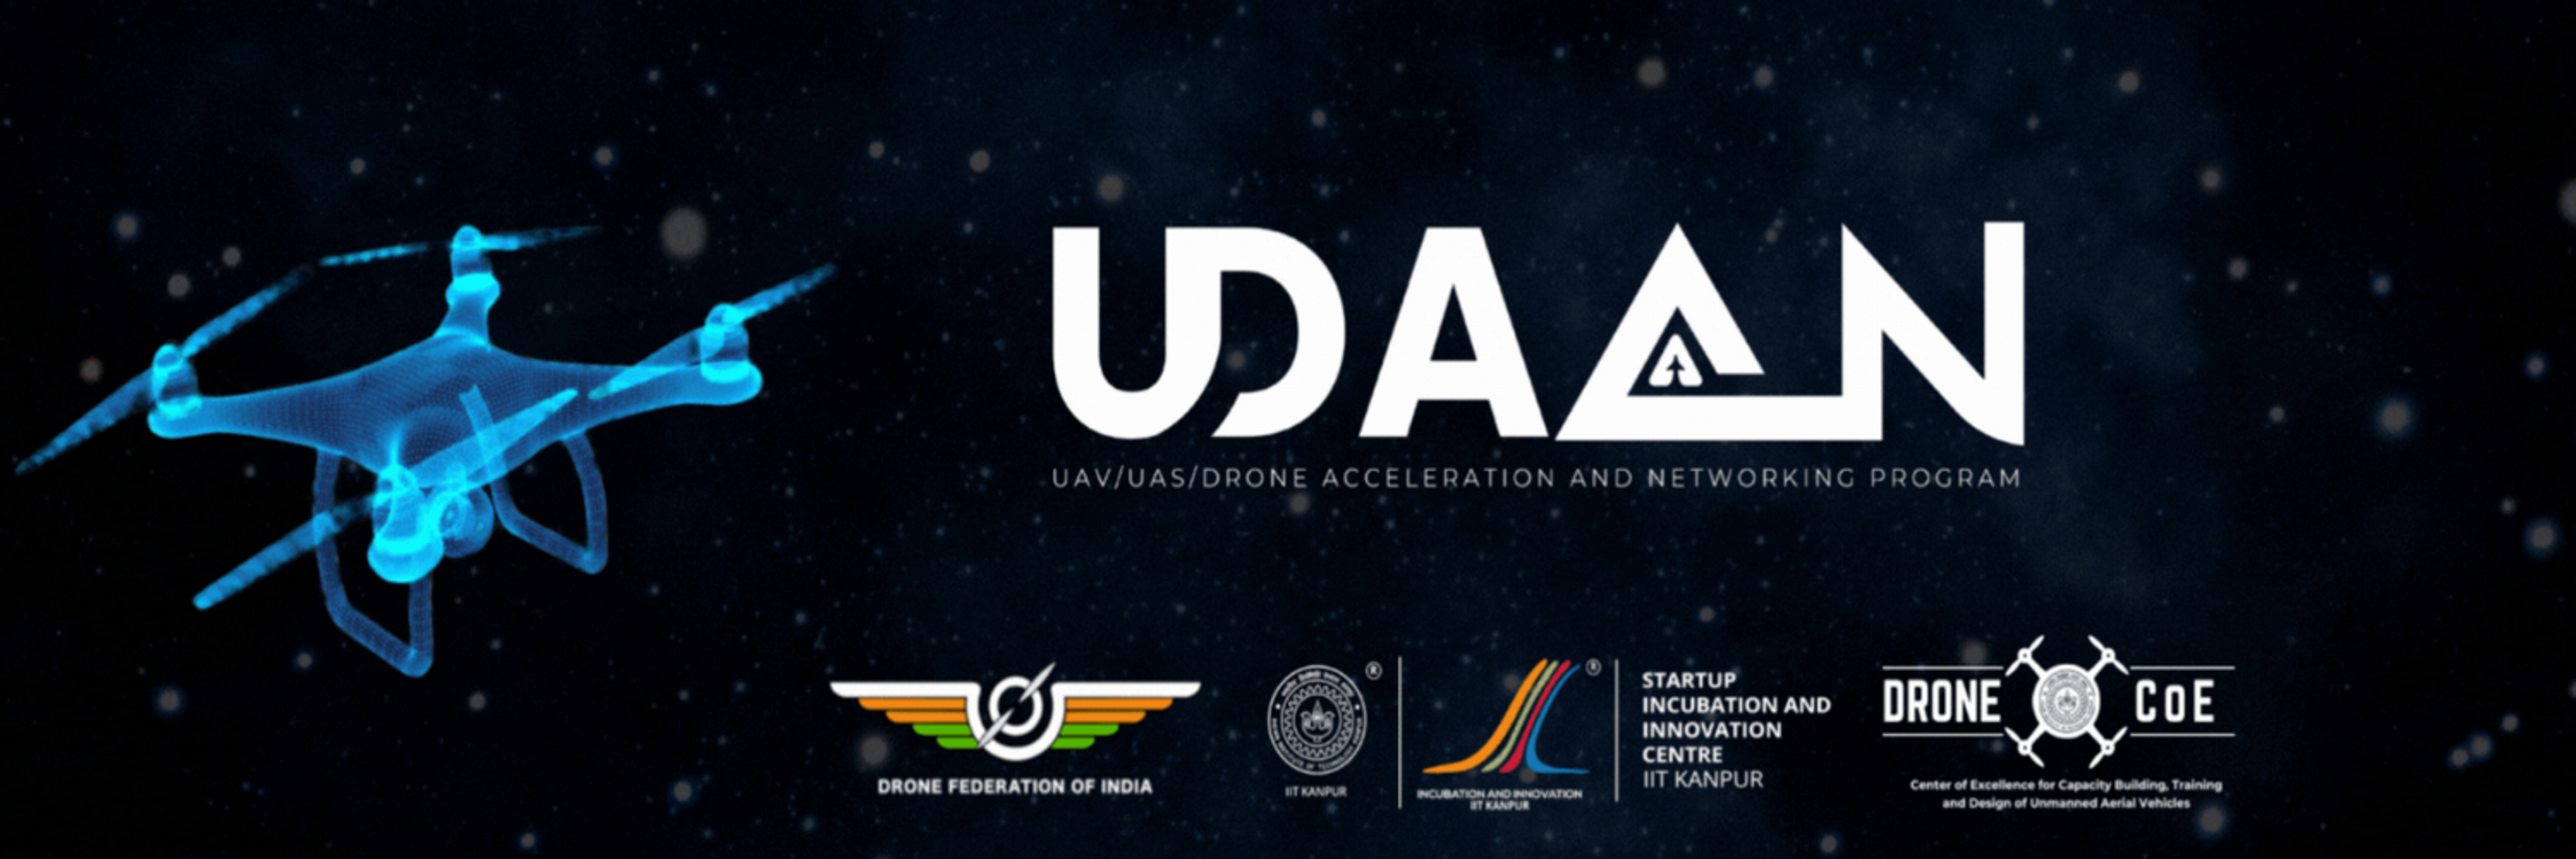 The image is a promotional banner for the UDAAN program, which stands for UAV/UAS/Drone Acceleration and Networking. It features a central graphic of a glowing, blue holographic drone set against a dark, starry sky background. On the right, the program name "UDAAN" is prominently displayed in large white letters. Below the program name, various logos are arranged, representing the program's key partners and supporters: the Drone Federation of India, IIT Kanpur, the Startup Incubation and Innovation Centre at IIT Kanpur, and the Centre of Excellence for Capacity Building, Training, and Design of Unmanned Aerial Vehicles. This banner effectively communicates the technological and collaborative essence of the UDAAN program.